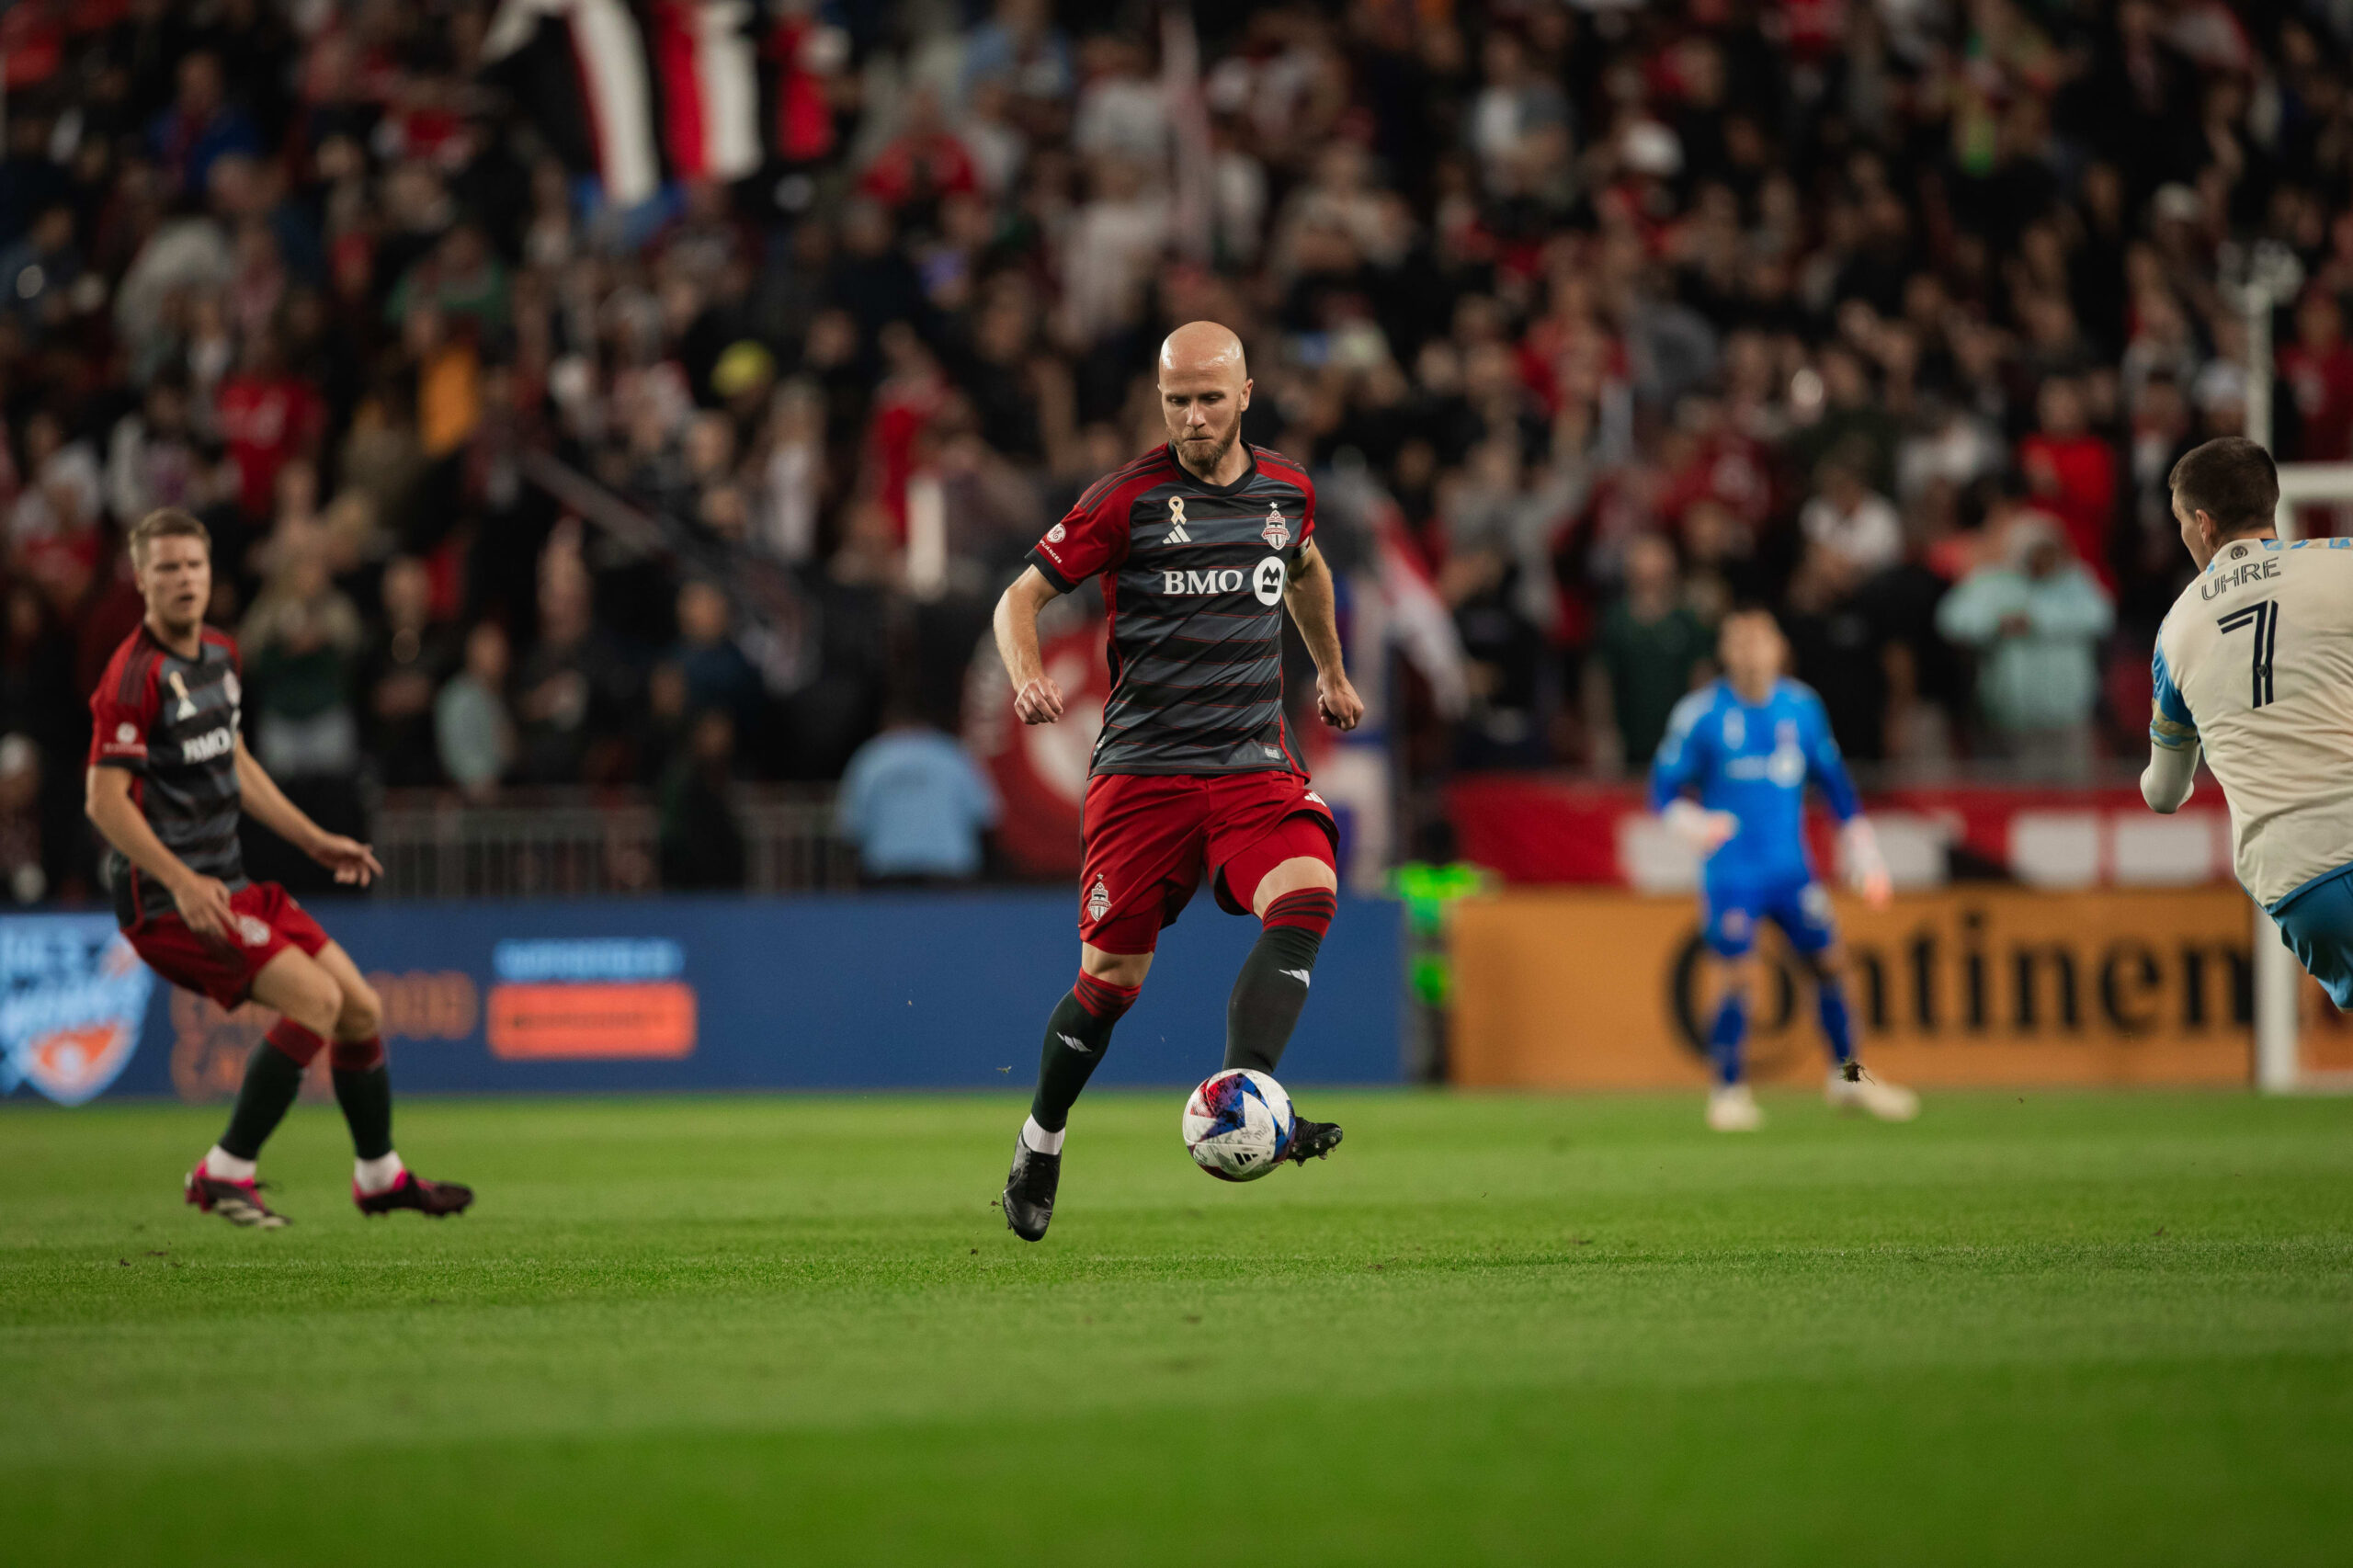 Toronto FC player during a game.